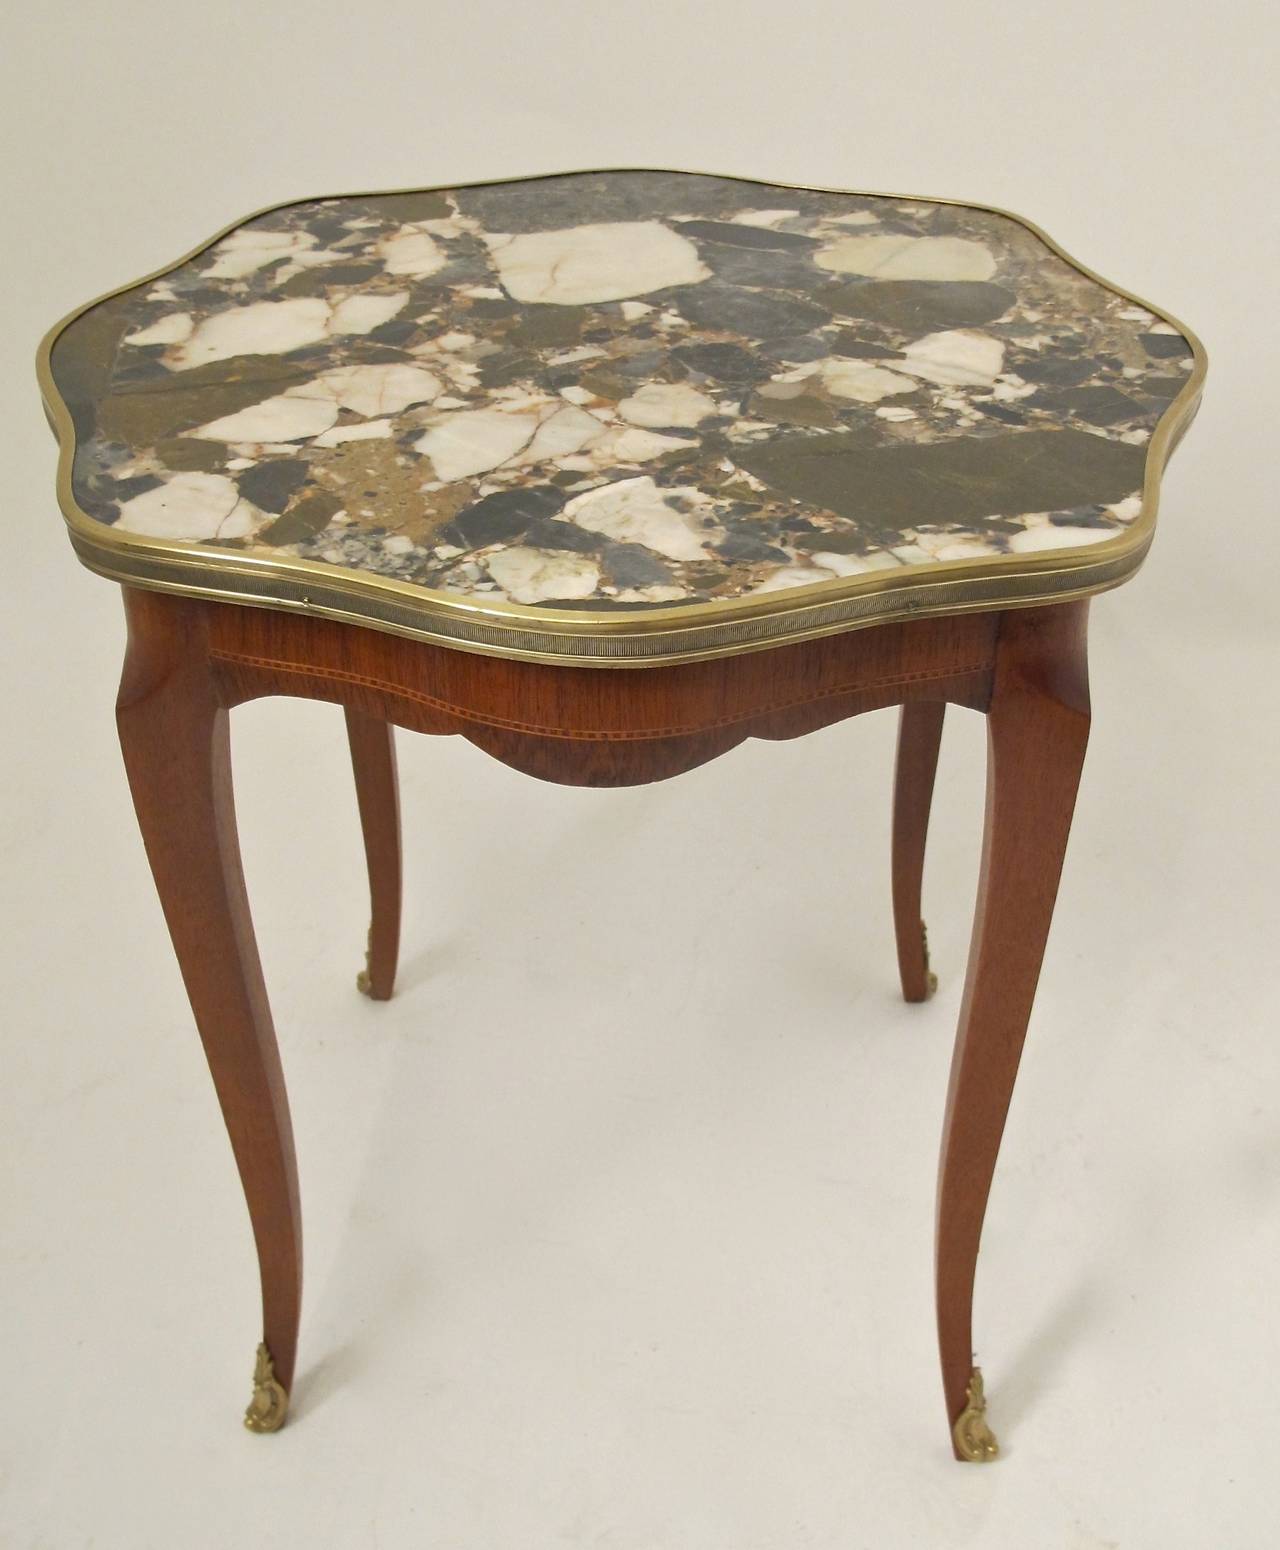 Italian Breche de Alp marble-top table with brass trimmed edge on cabriole legs with brass sabots. Mahogany with satinwood inlay. Italian, 1950s.